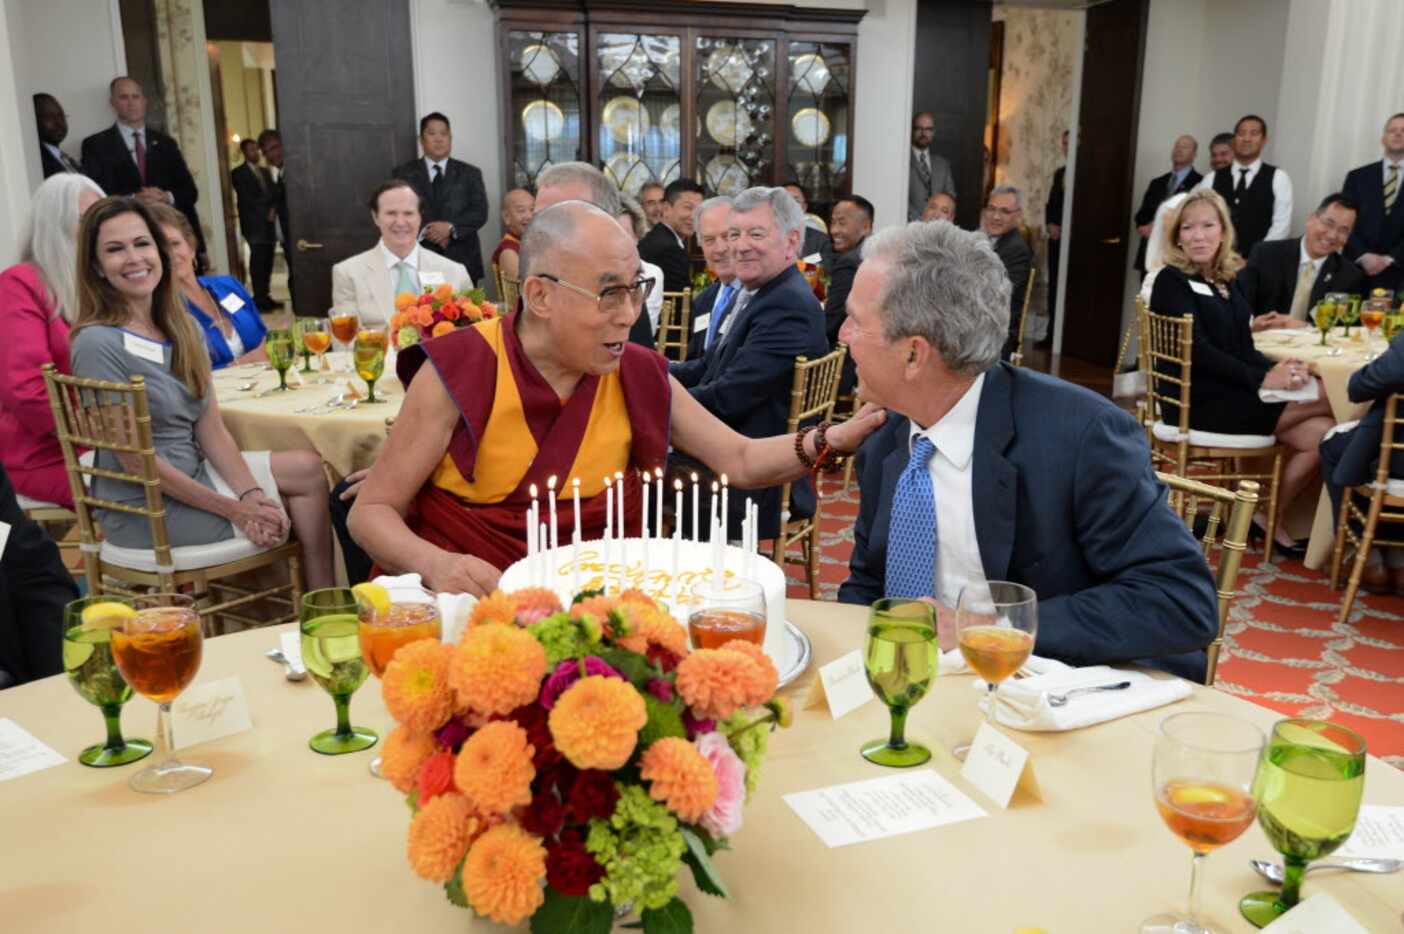 The 14th Dalai Lama visited the Bush Center in 2015. He's shown with former President George...